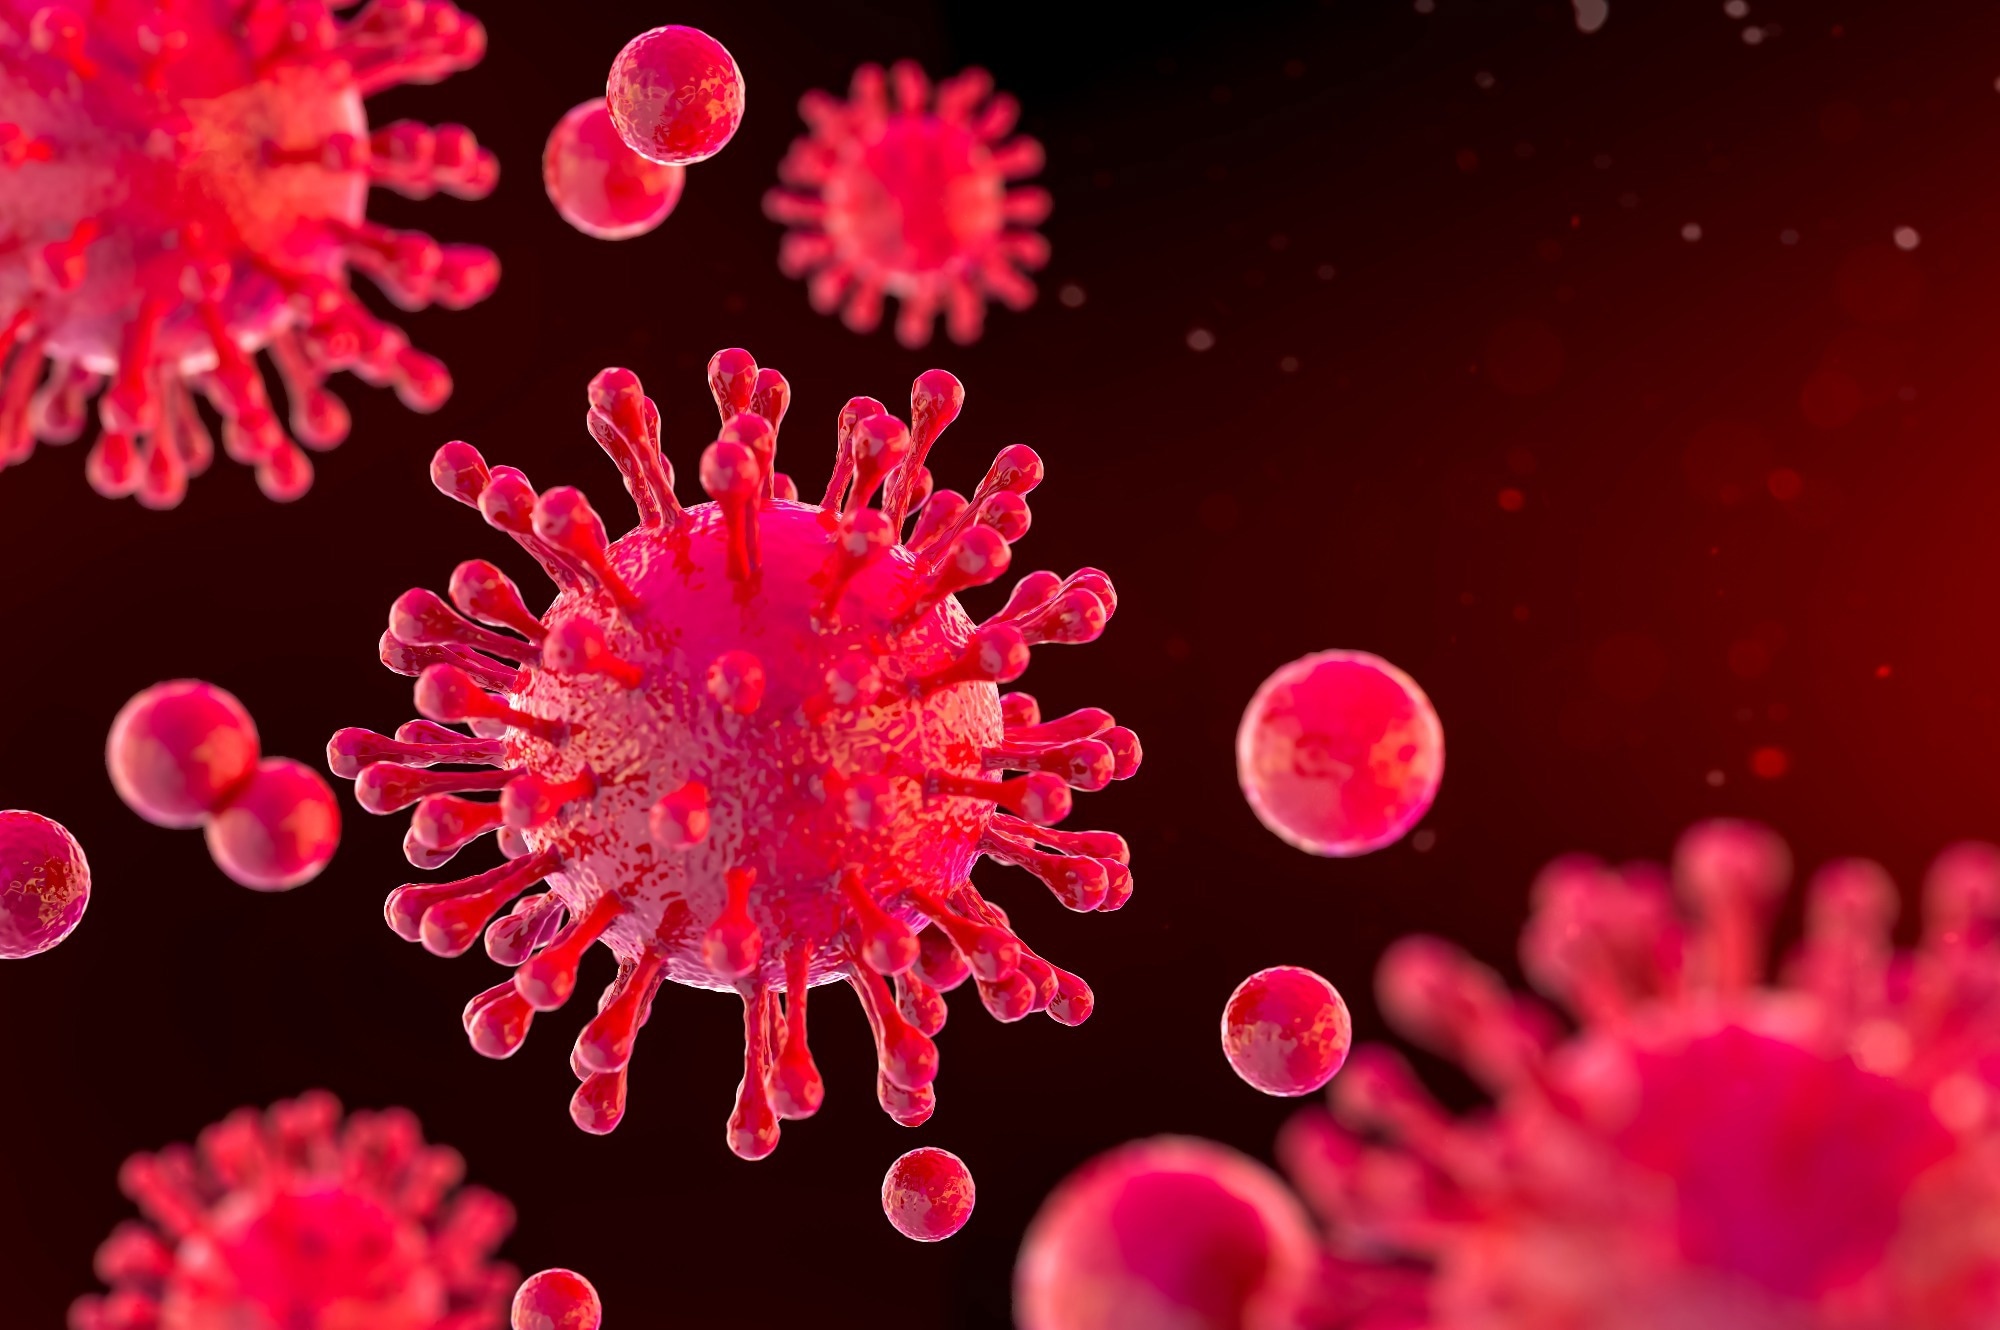 Study: Risk of Coronavirus Disease 2019 (COVID-19) among Those Up-to-Date and Not Up-to-Date on COVID-19 Vaccination. Image Credit: ONGUSHI / Shutterstock.com